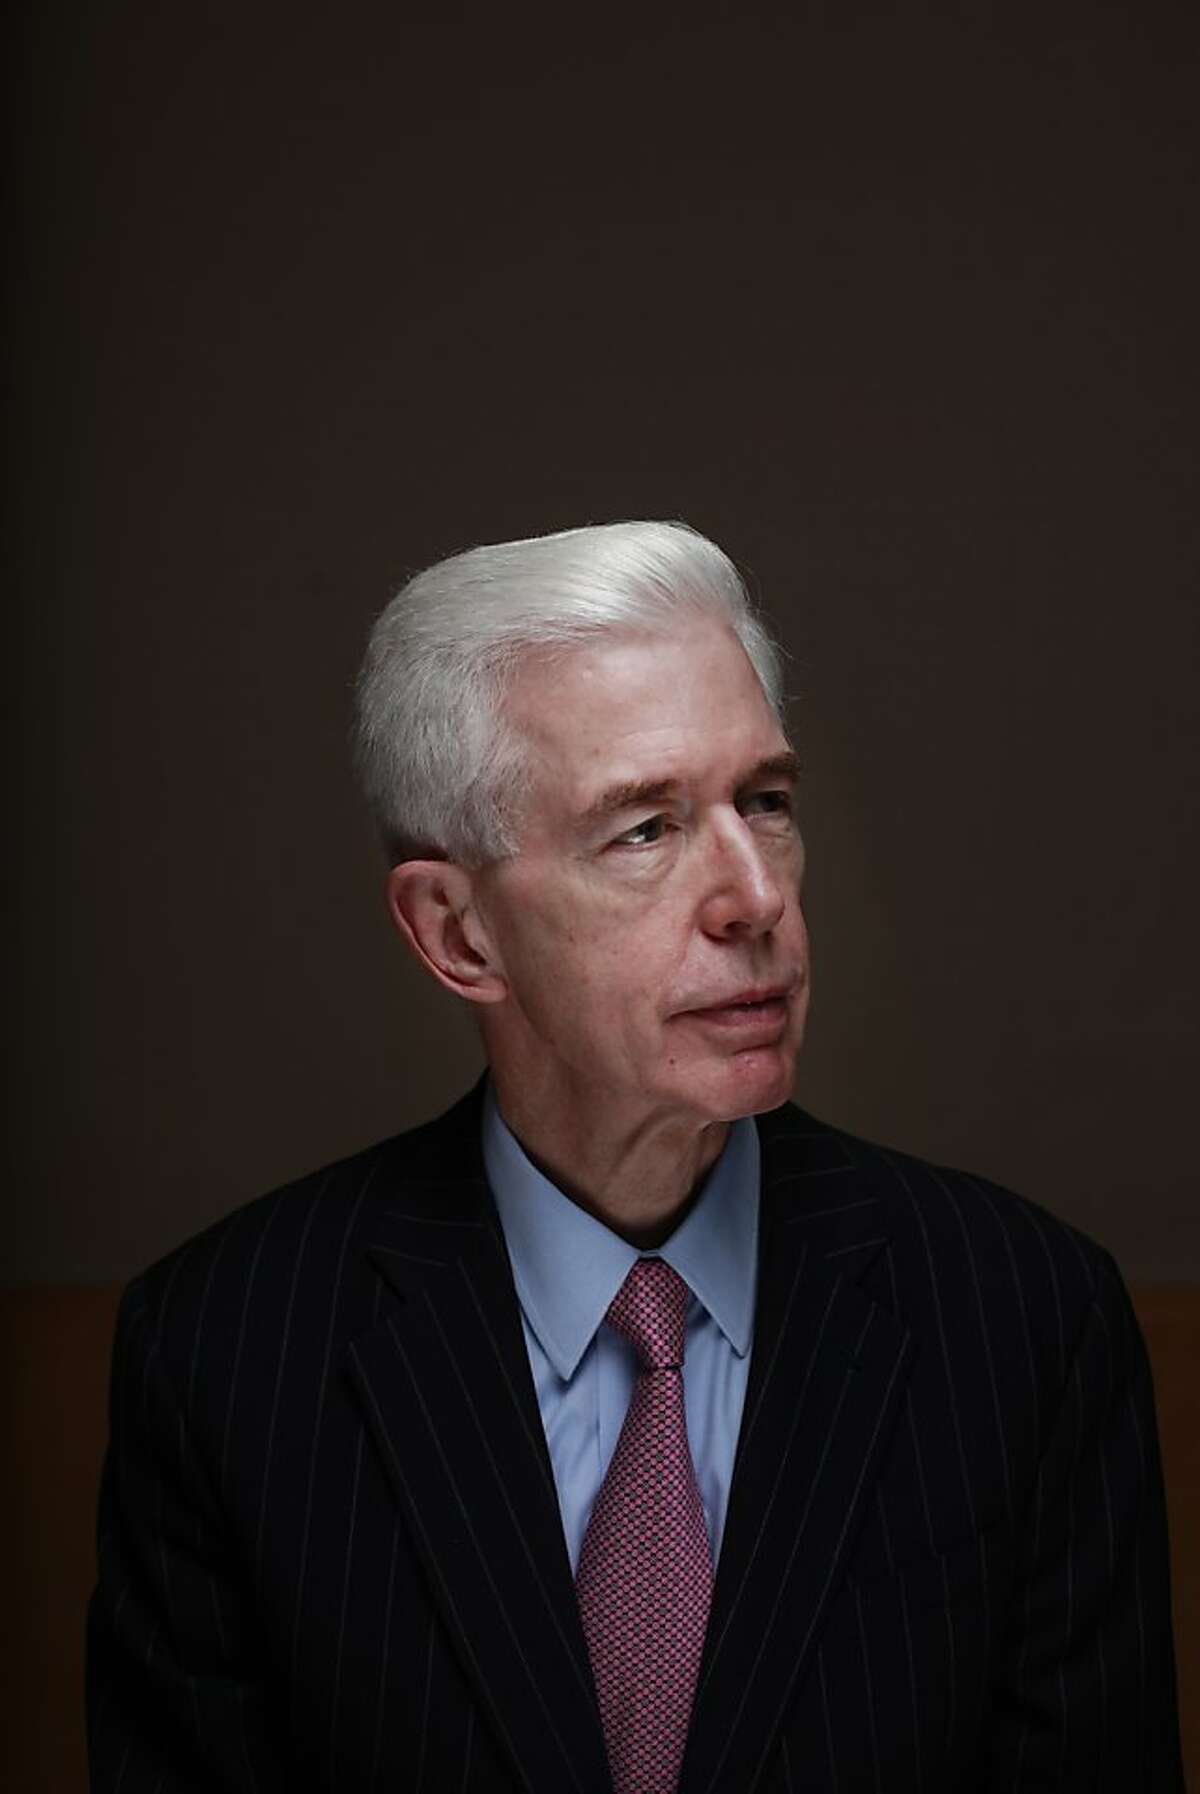 Ten years after being recall as the governor of California, Gov. Gray Davis sits for a portrait in the Four Seasons Hotel on March 19, 2013 in San Francisco, Calif. March 25, 2013 marked a decade since the birth of a groundbreaking grassroots political movement that rocked California and the nation â€” and planted the seeds of the Tea Party movement that has since reshaped national politics. The great 2003 California Recall of Democratic Gov. Gray Davis, begun by a few stalwart conservative activists and talk show hosts angered over the stateâ€™s car tax, started a political tidal wave that galvanized a new voter force and upended political convention. It also flashed the early power of online political organizing â€” it was the first major race where voters could download petitions online.